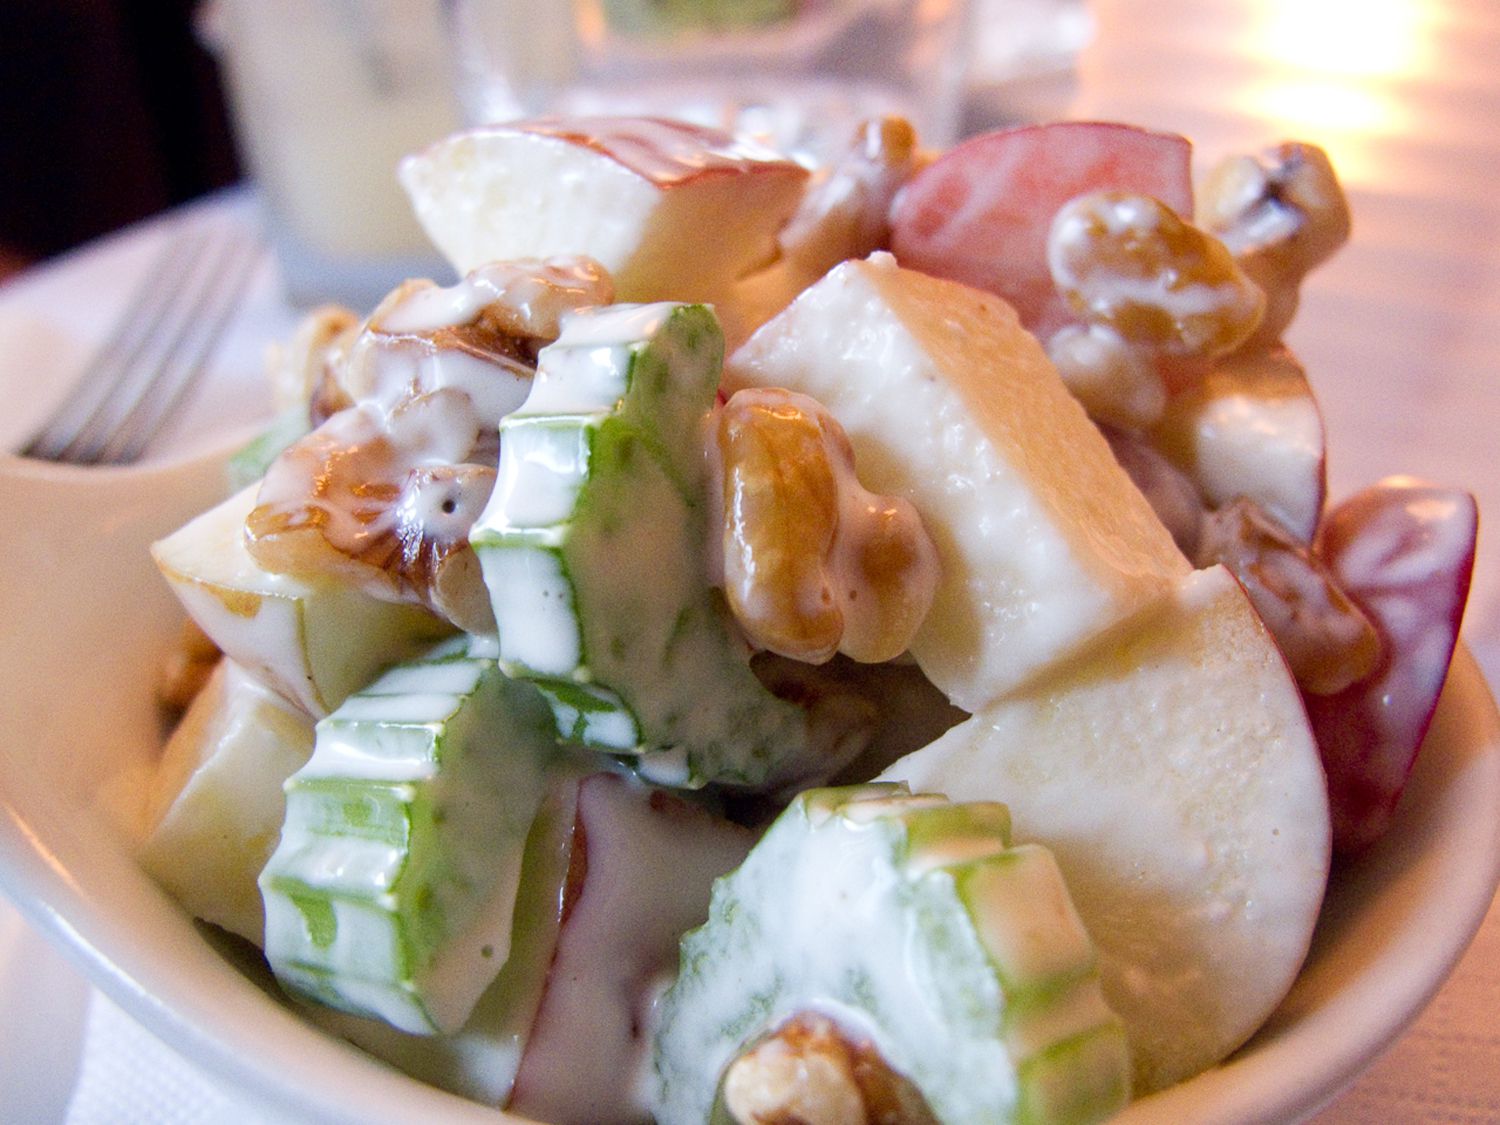 Classic Waldorf Salad Recipe With Apples and Walnuts